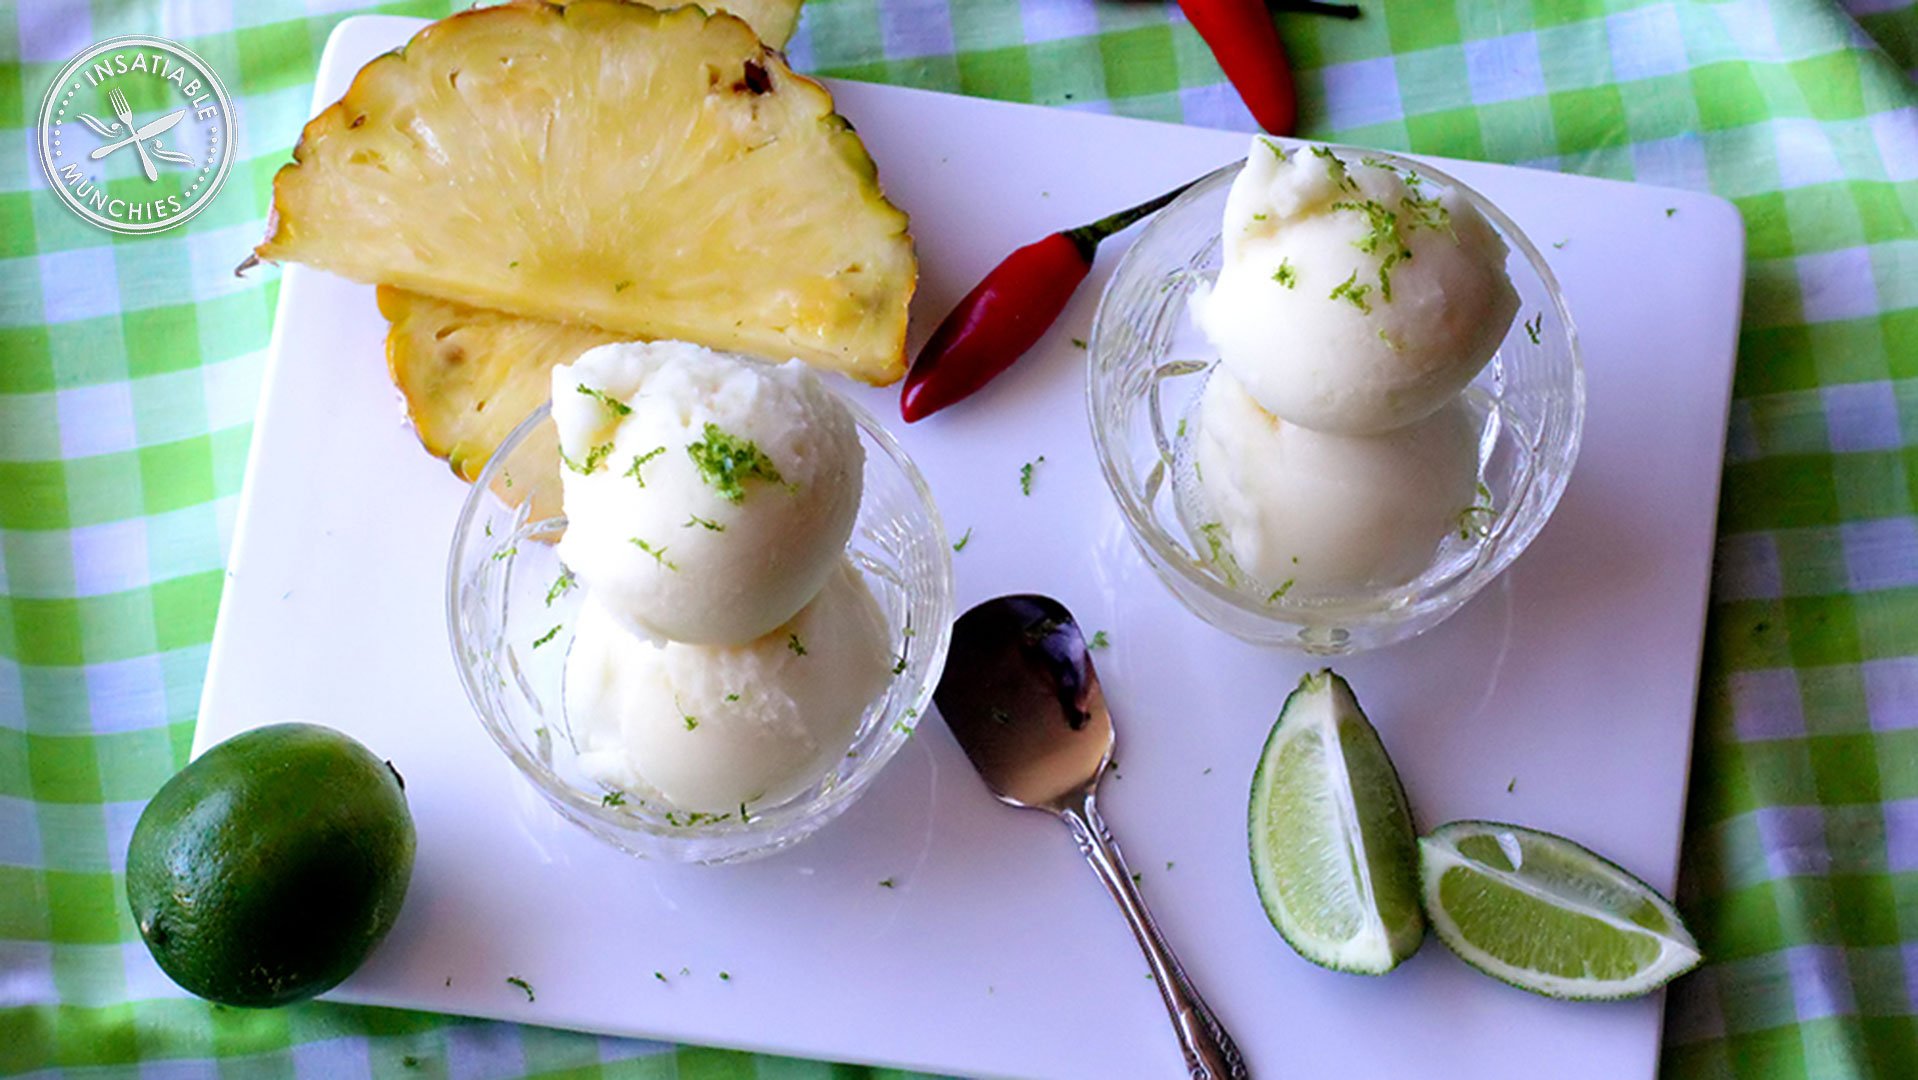 Juices of pineapple and lime and infused with bird's eye chilli and churned into this refreshing sorbet.